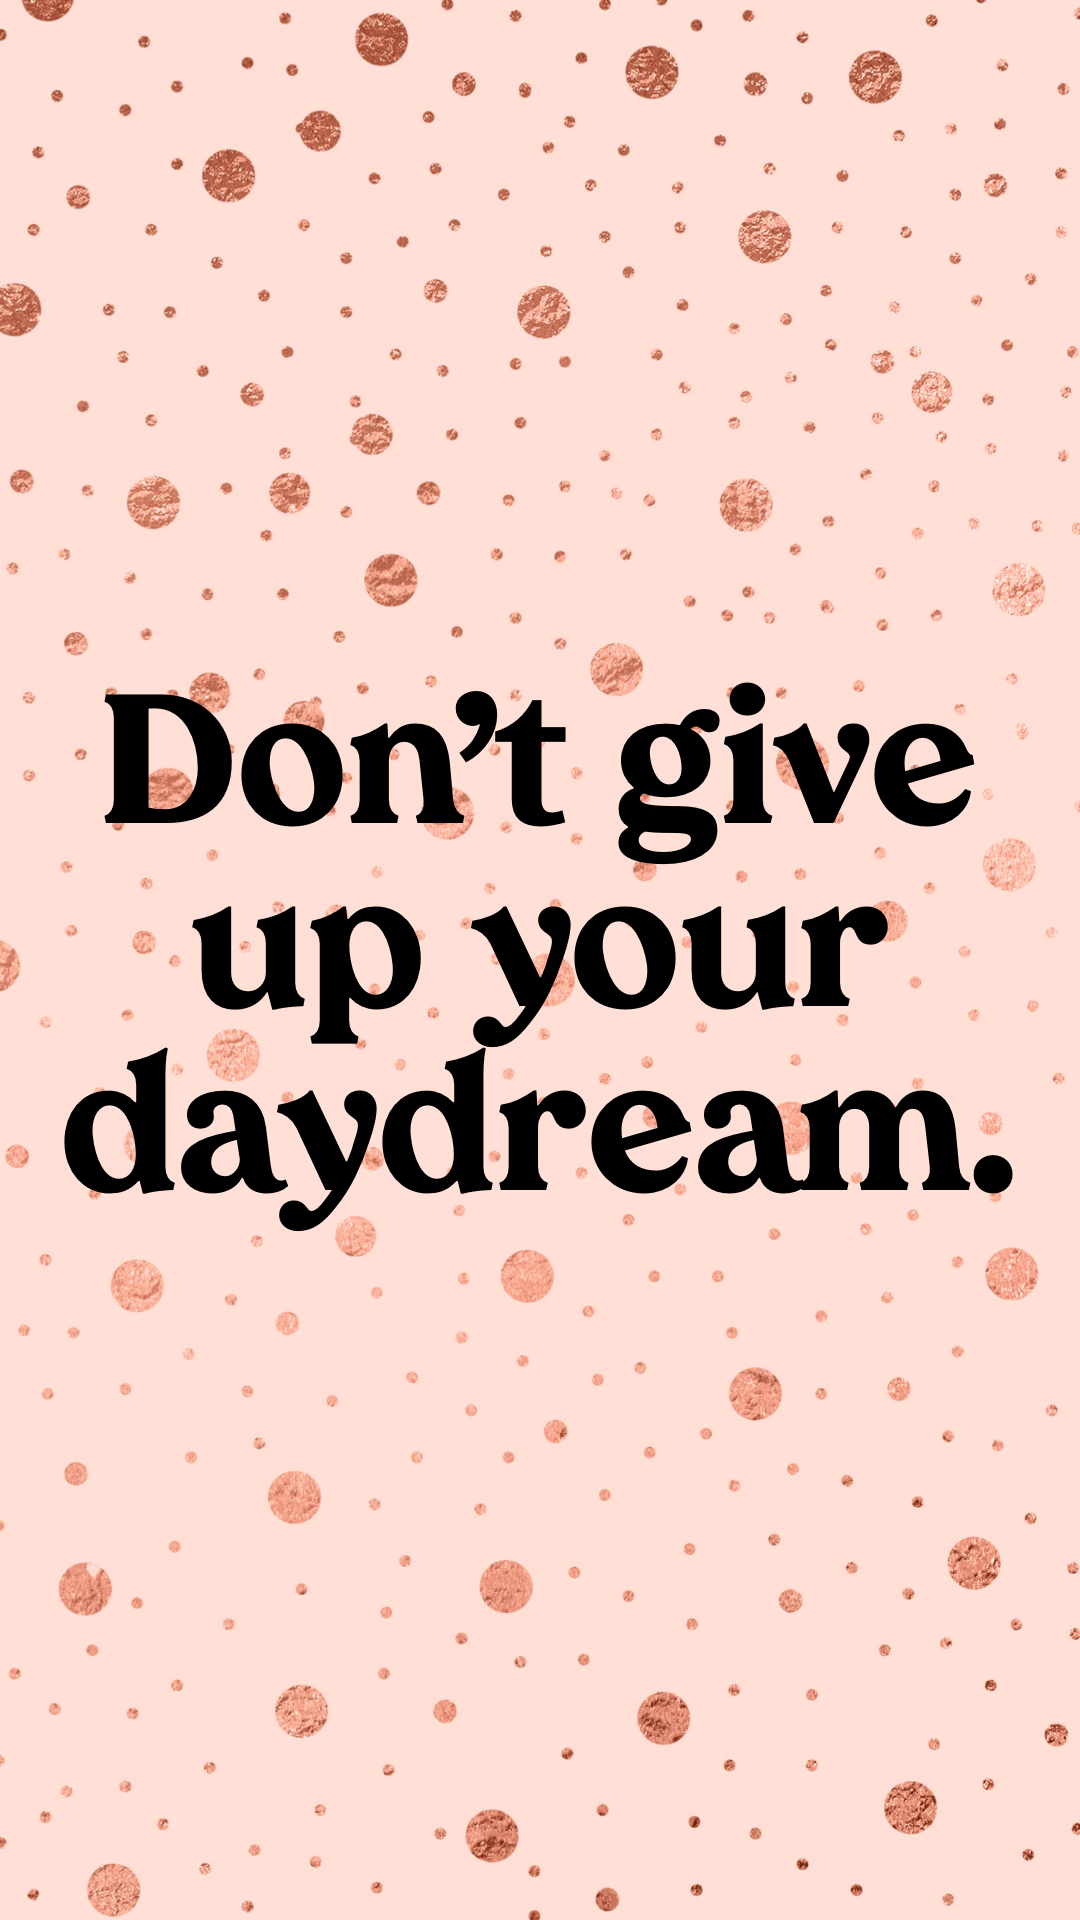 Phone Wallpaper, Phone Background, Quotes To Live By, - Polka Dot - HD Wallpaper 